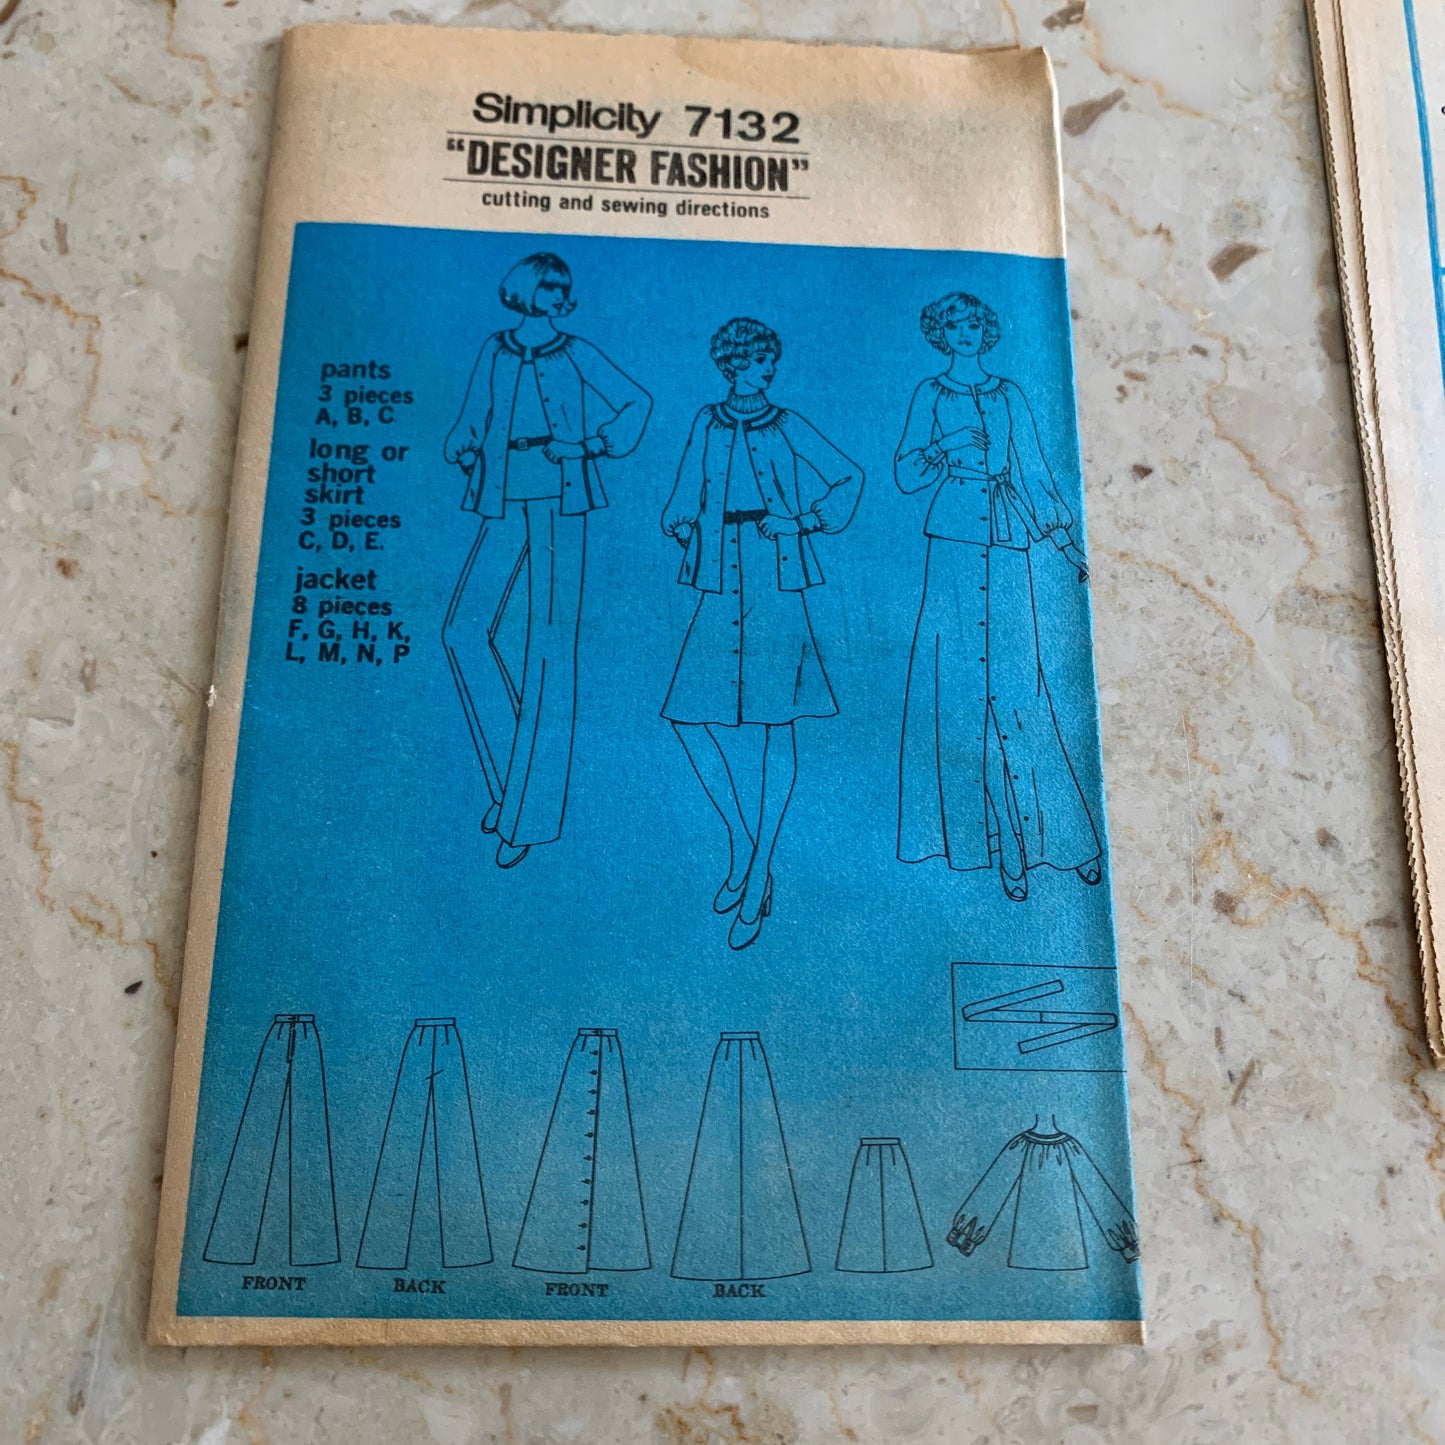 Lady’s Vintage Suit Pattern Pants and Top or Skirt in 2 Lengths